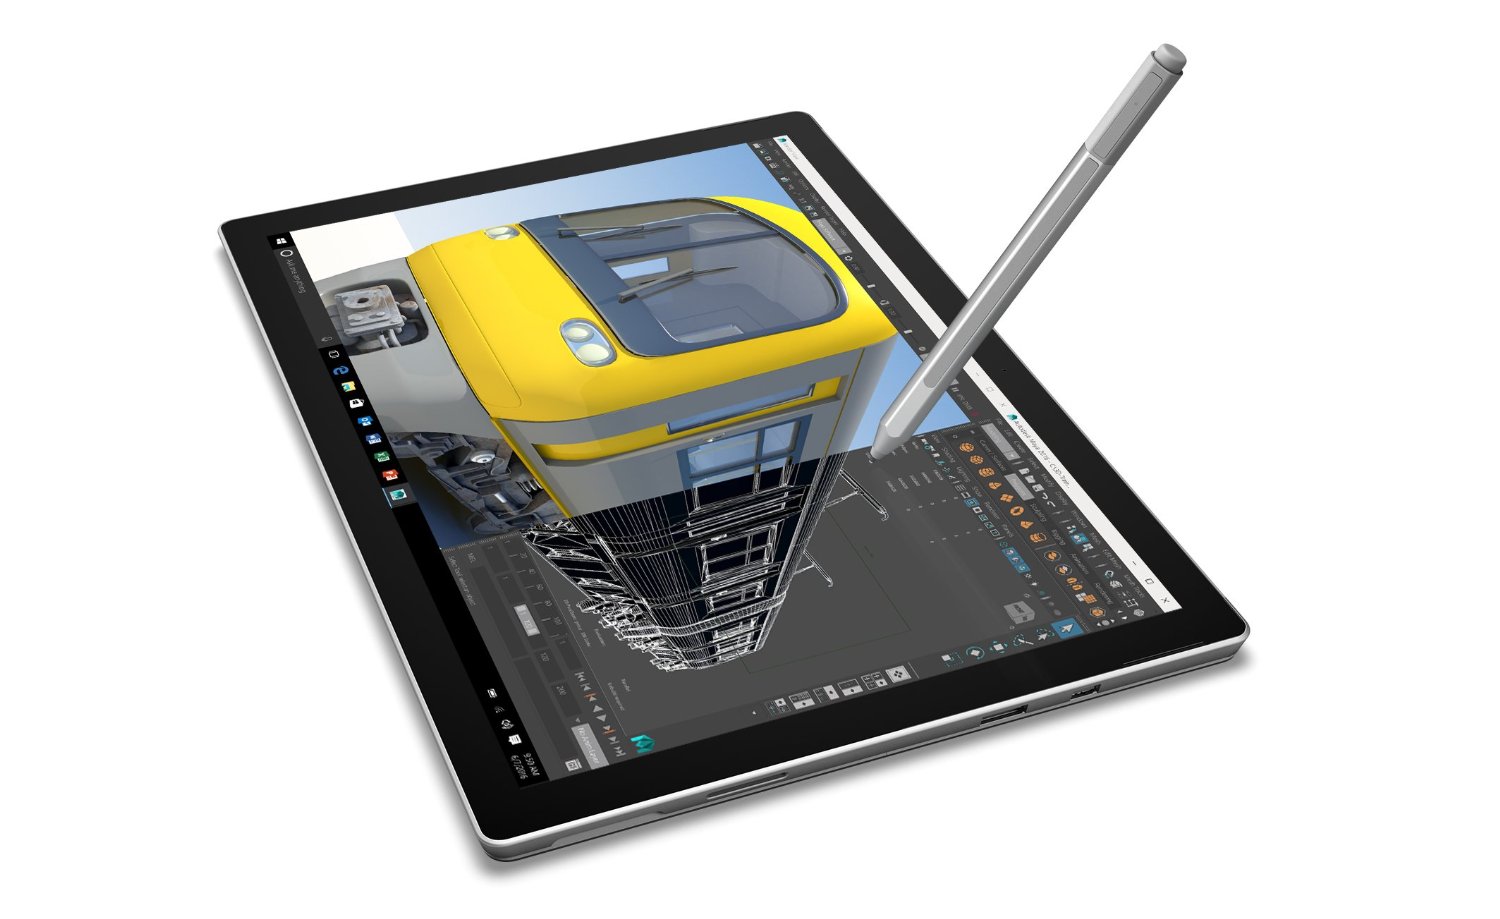 Microsoft best dewing device for artists